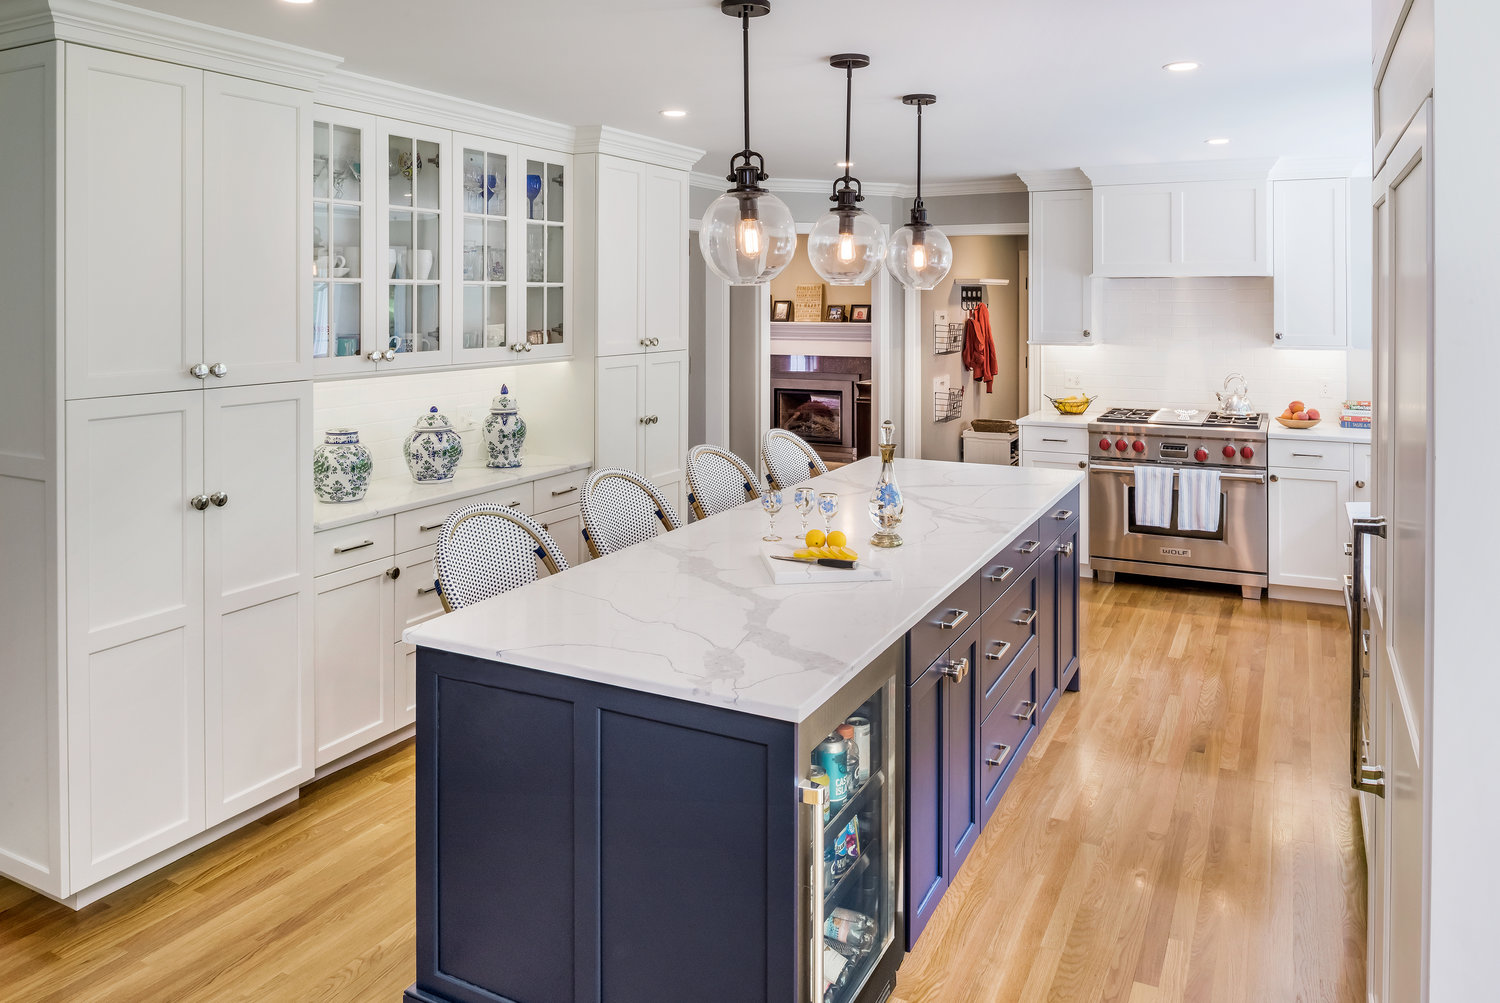 Example of using a pop of color strategically in a kitchen island – signature Cabinetry island in Navy Hale with perimeter cabinets in Colonial Simply White